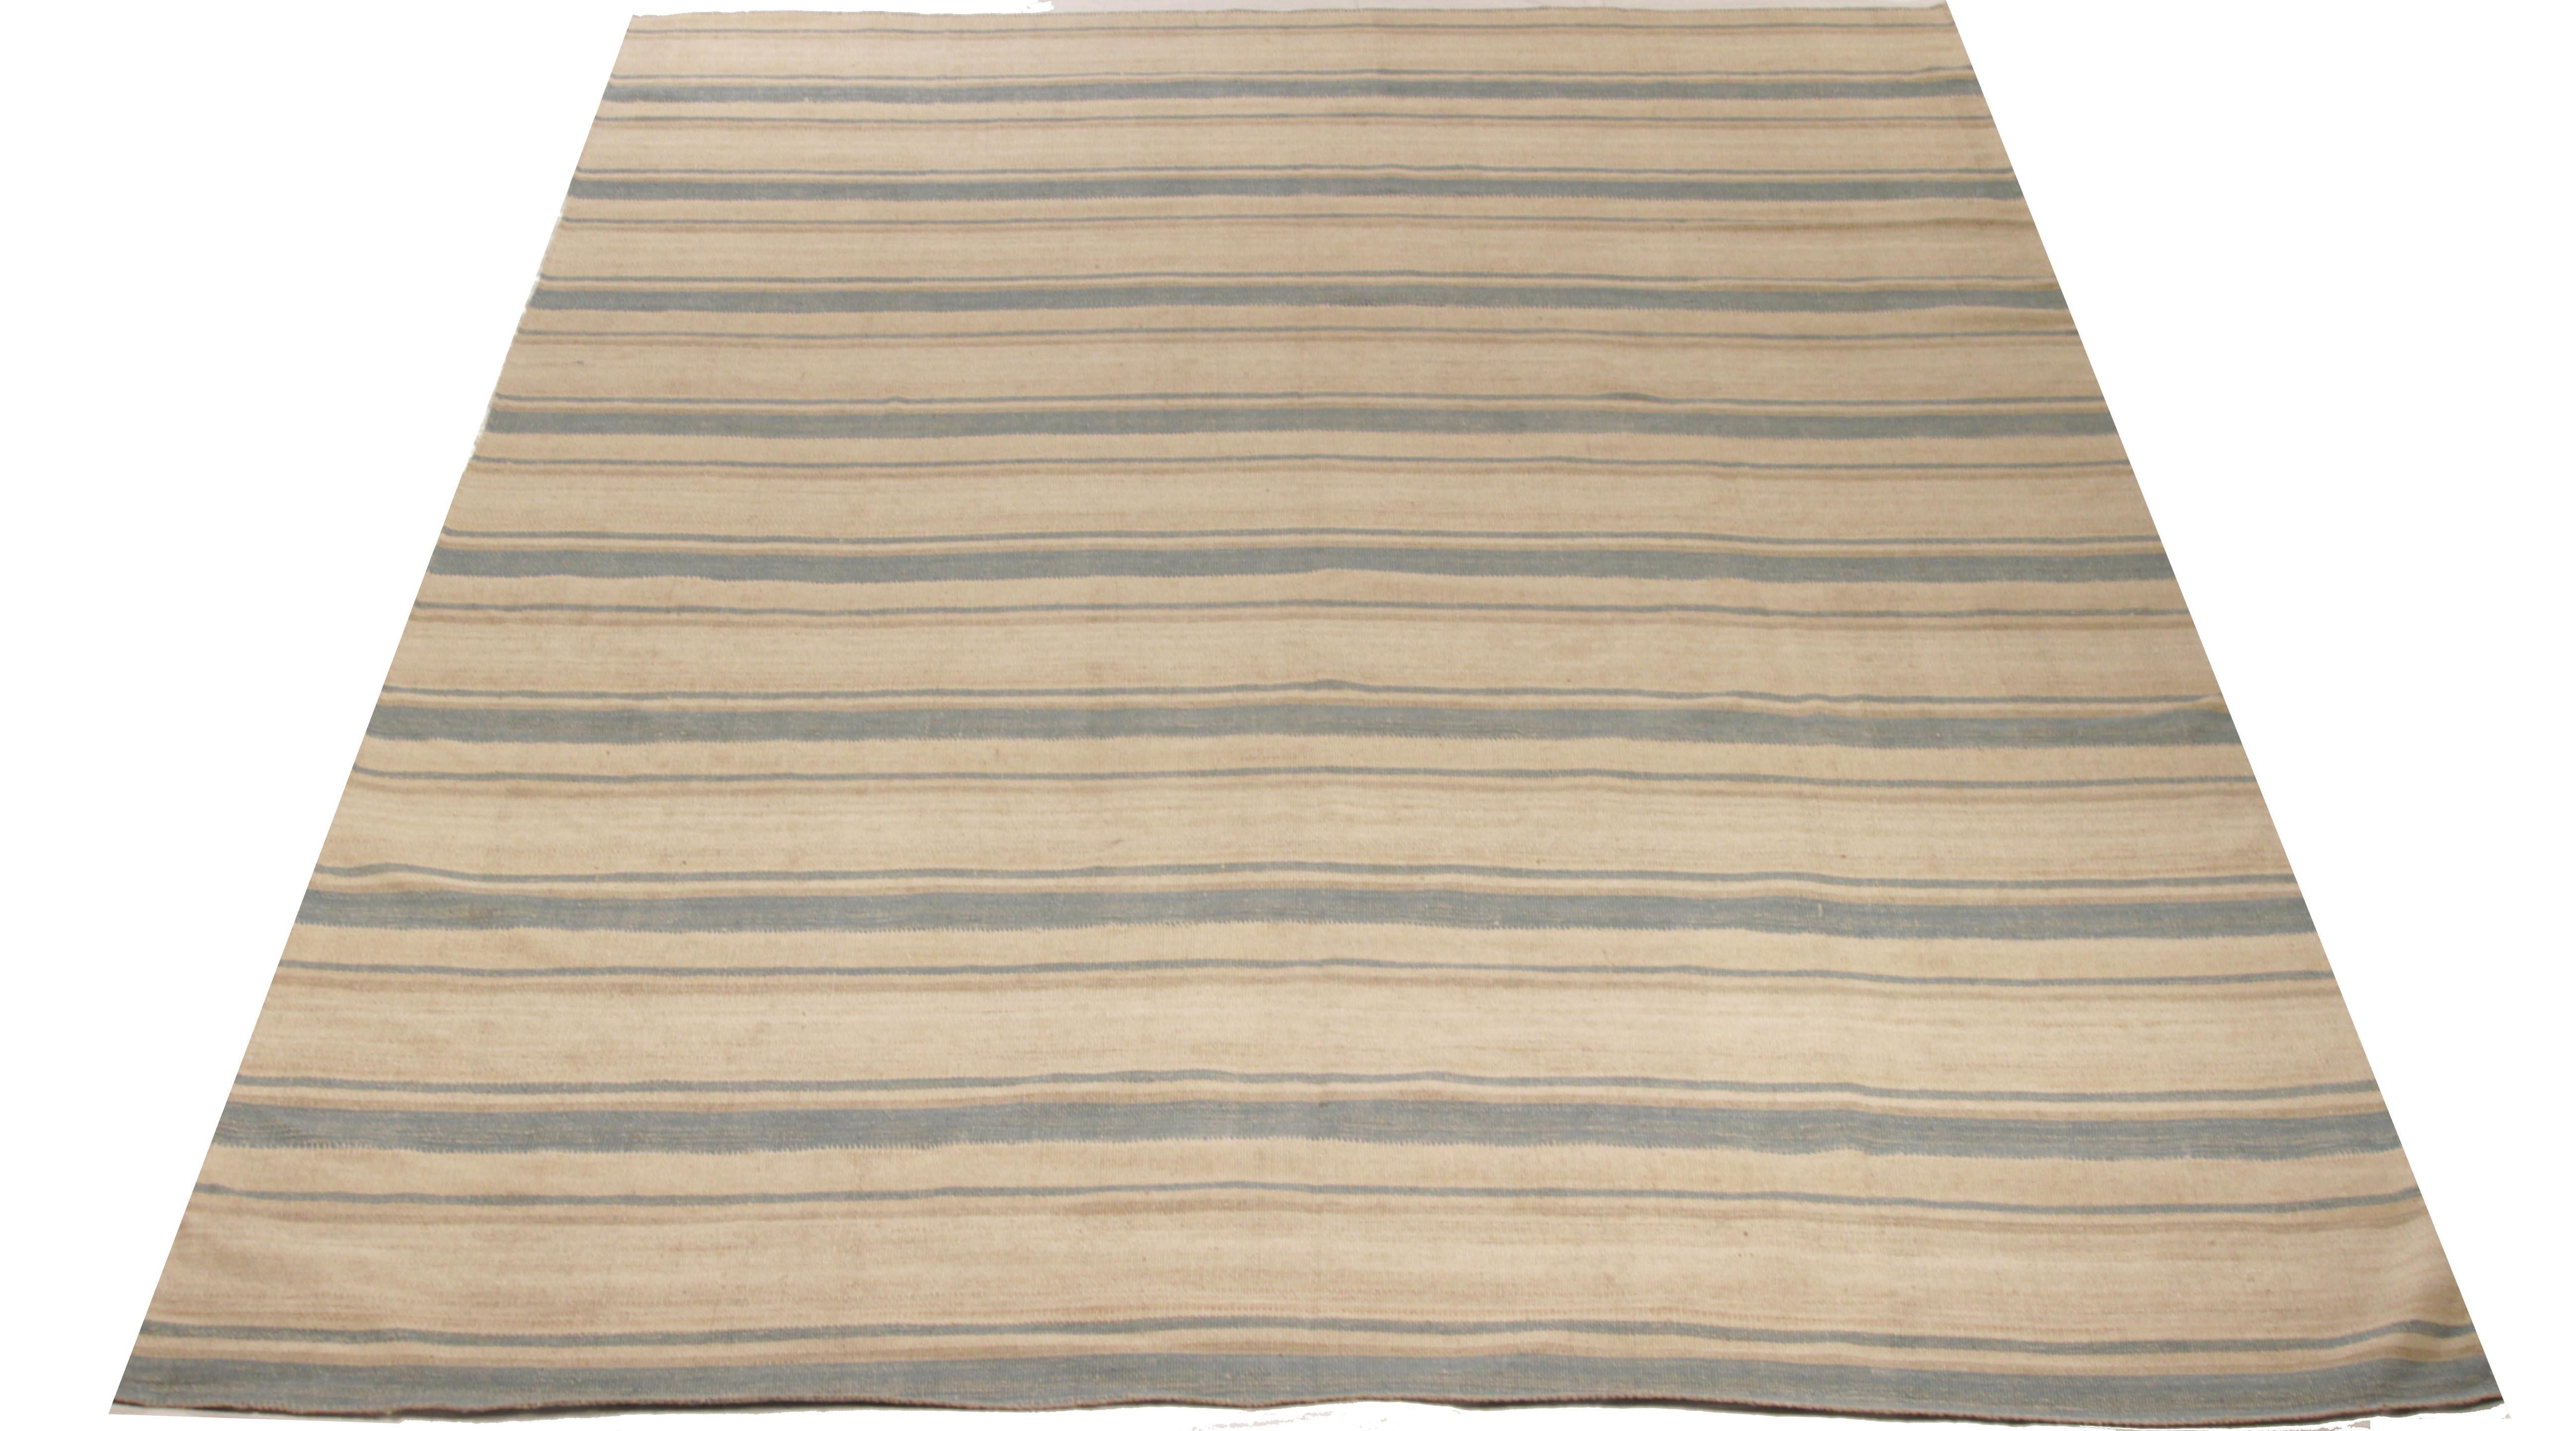 A new production Persian rug handwoven from the finest sheep’s wool and colored with all-natural vegetable dyes that are safe for humans and pets. It’s a traditional Kilim flat-weave design featuring a lovely ivory field with gray and beige stripes.